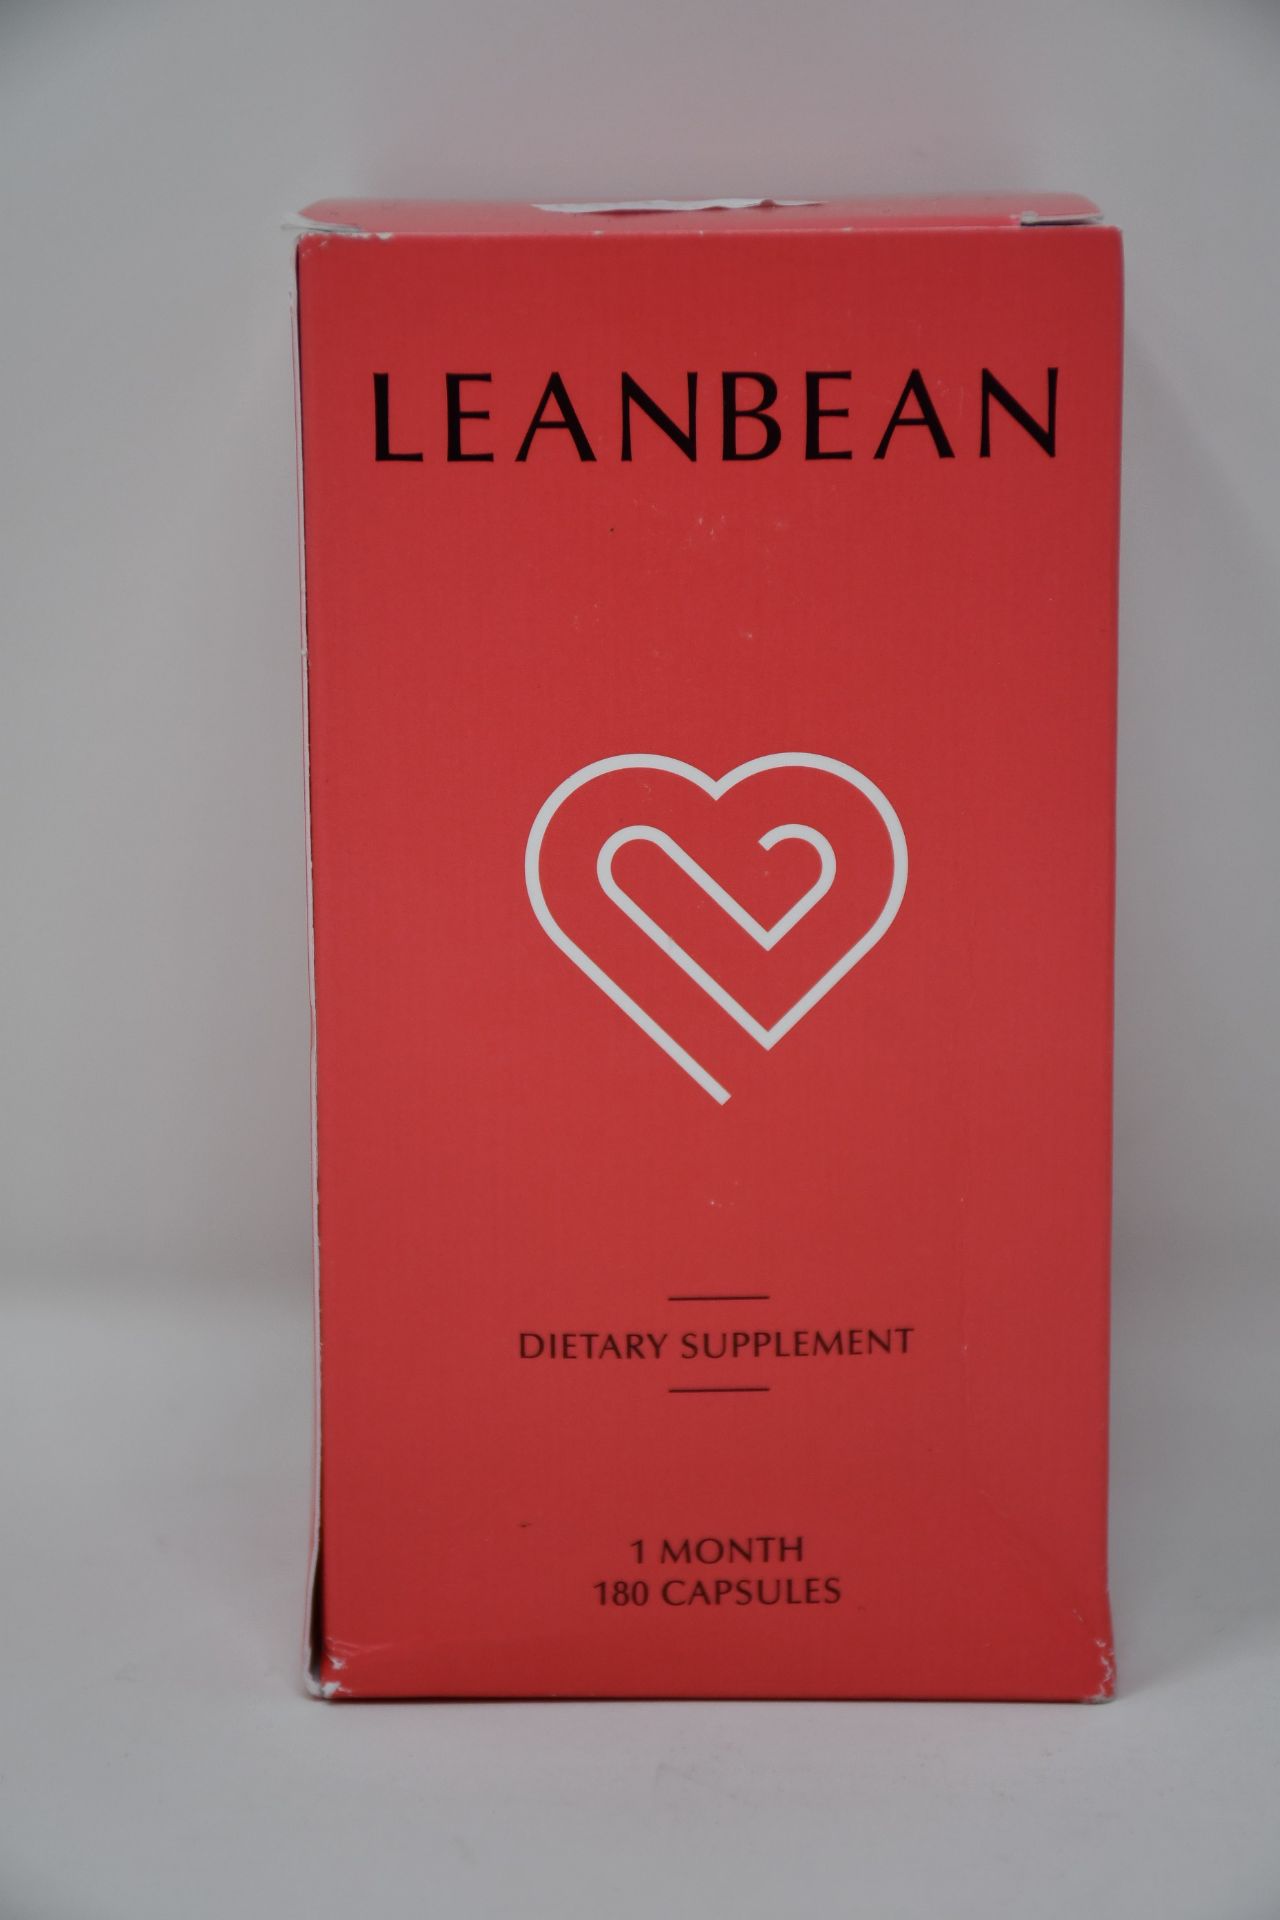 Ten boxed as new Leanbean Dietary Supplements (180 capsules, BB: 05/23).